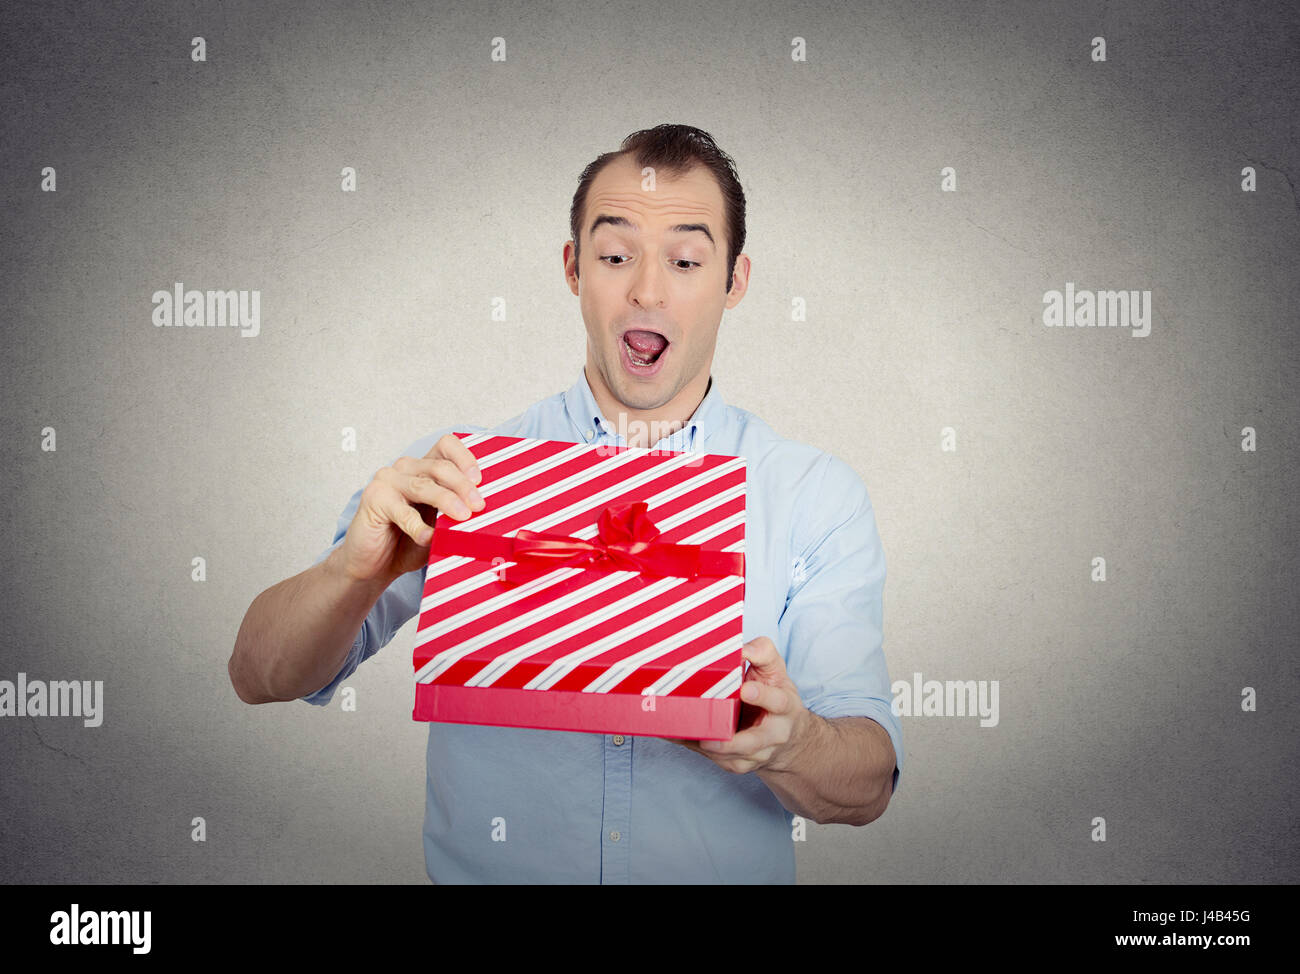 Closeup portrait happy super excited surprised young man about to open unwrap red gift box isolated grey wall background enjoying his present. Positiv Stock Photo